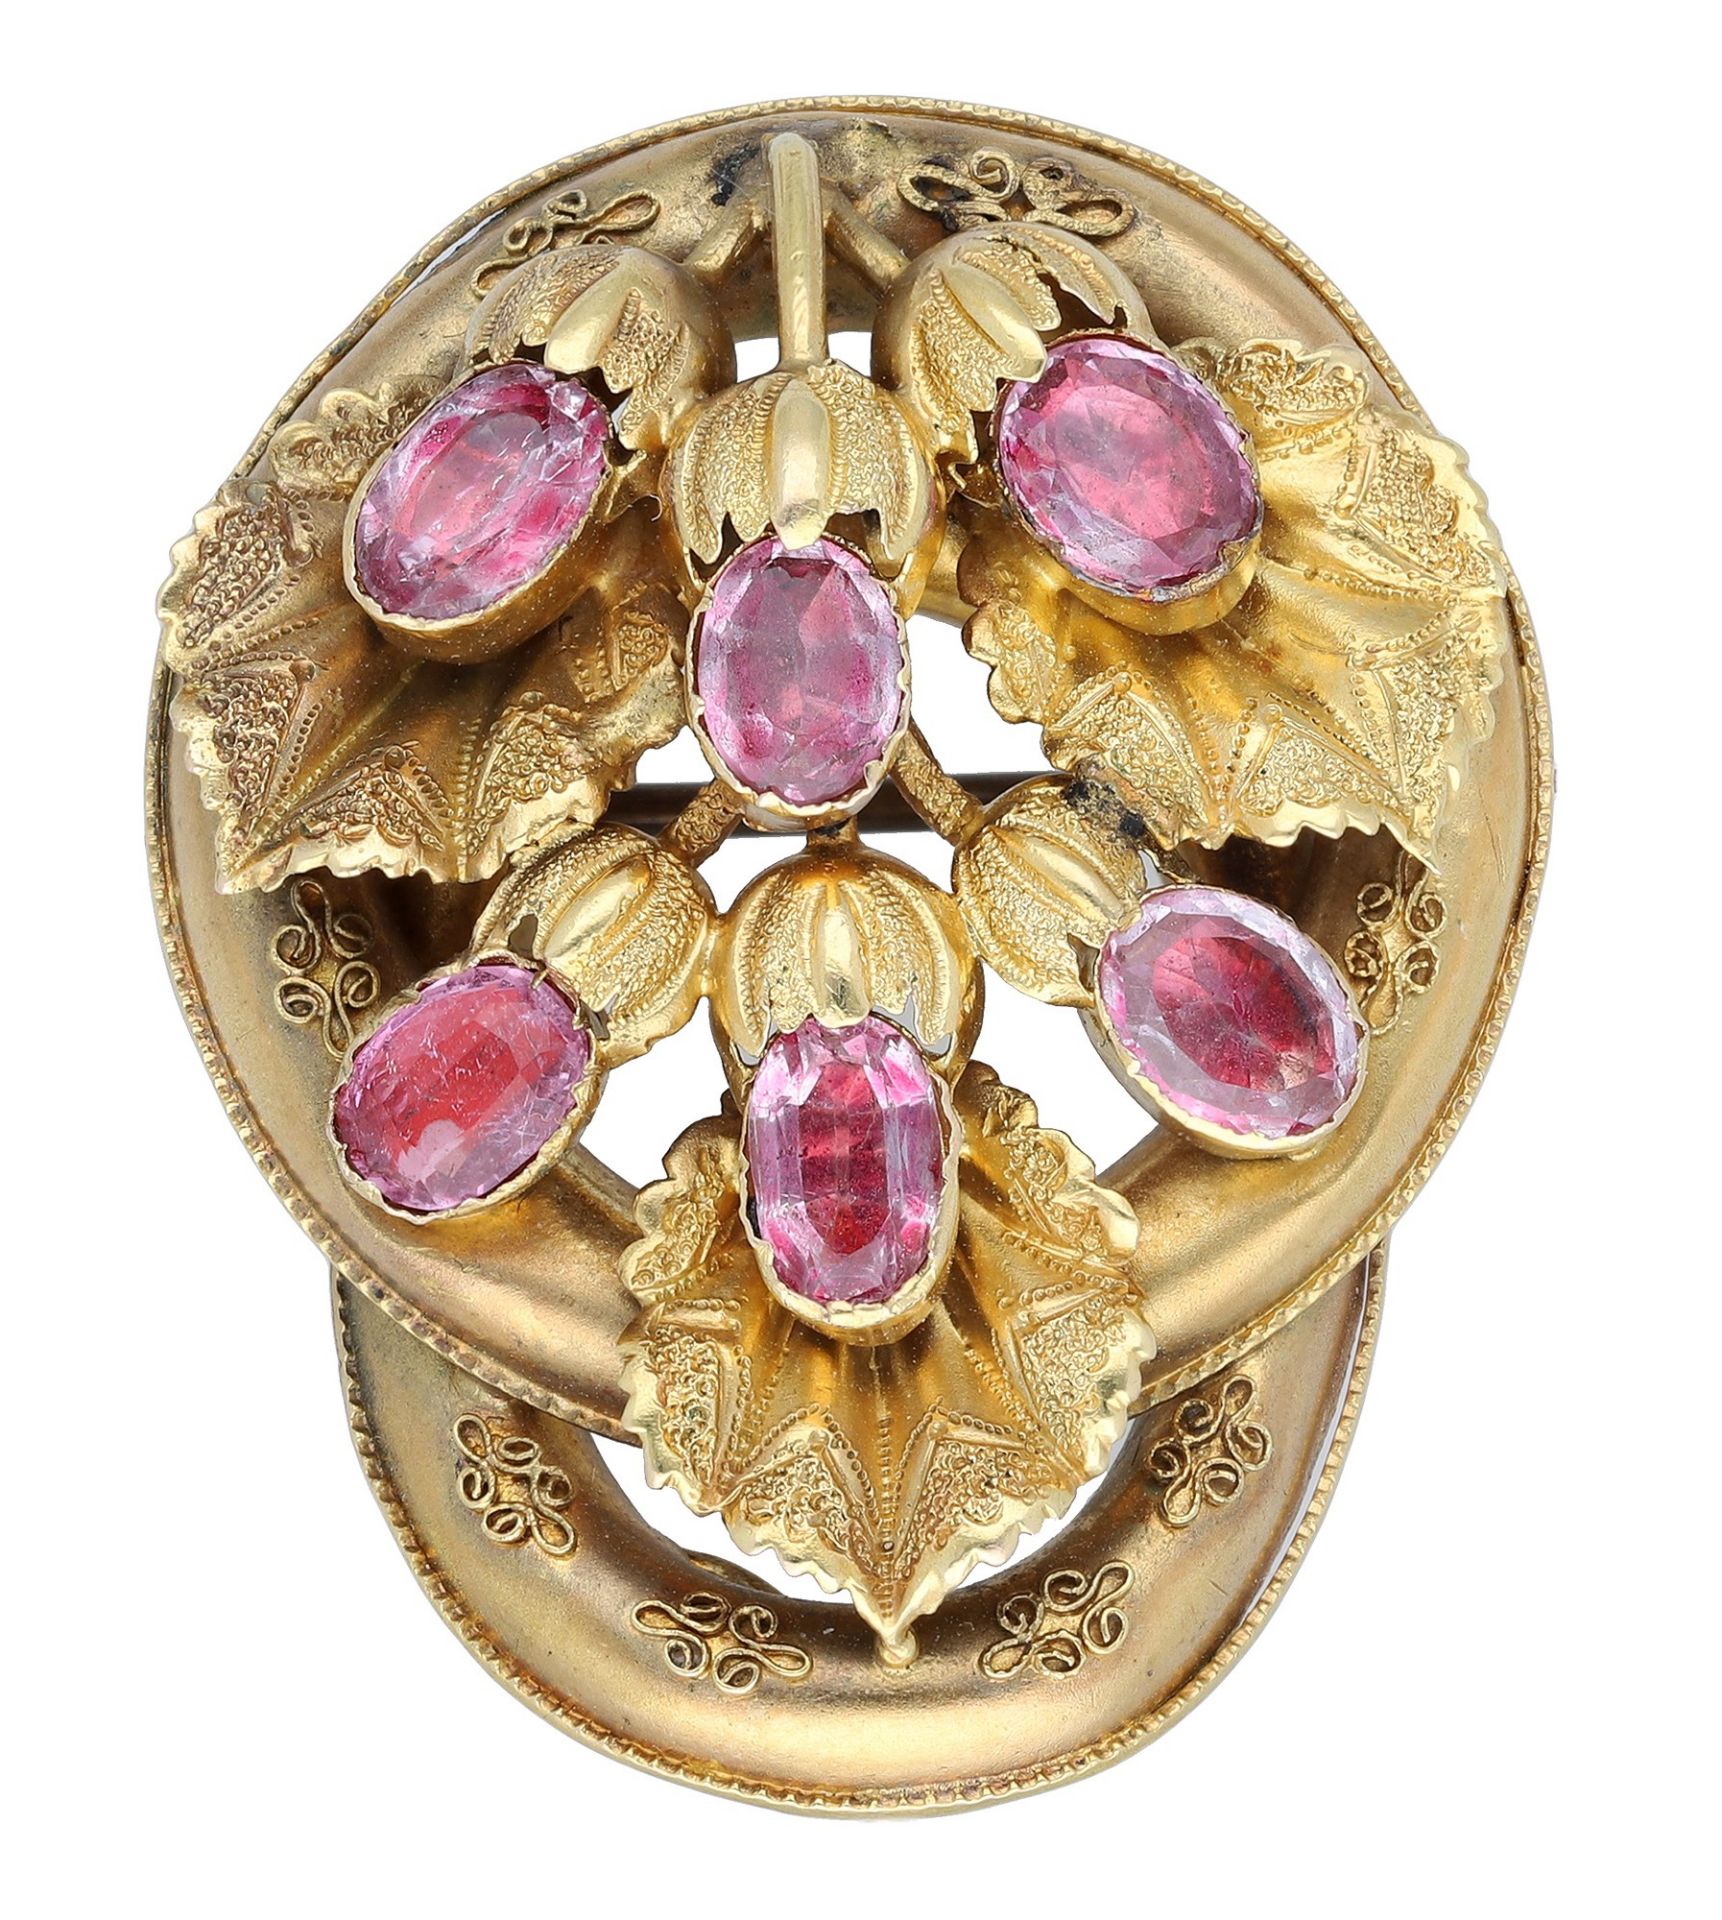 A mid 19th century gem-set brooch, the gold knot with bead and wirework decoration, applied... - Image 2 of 3